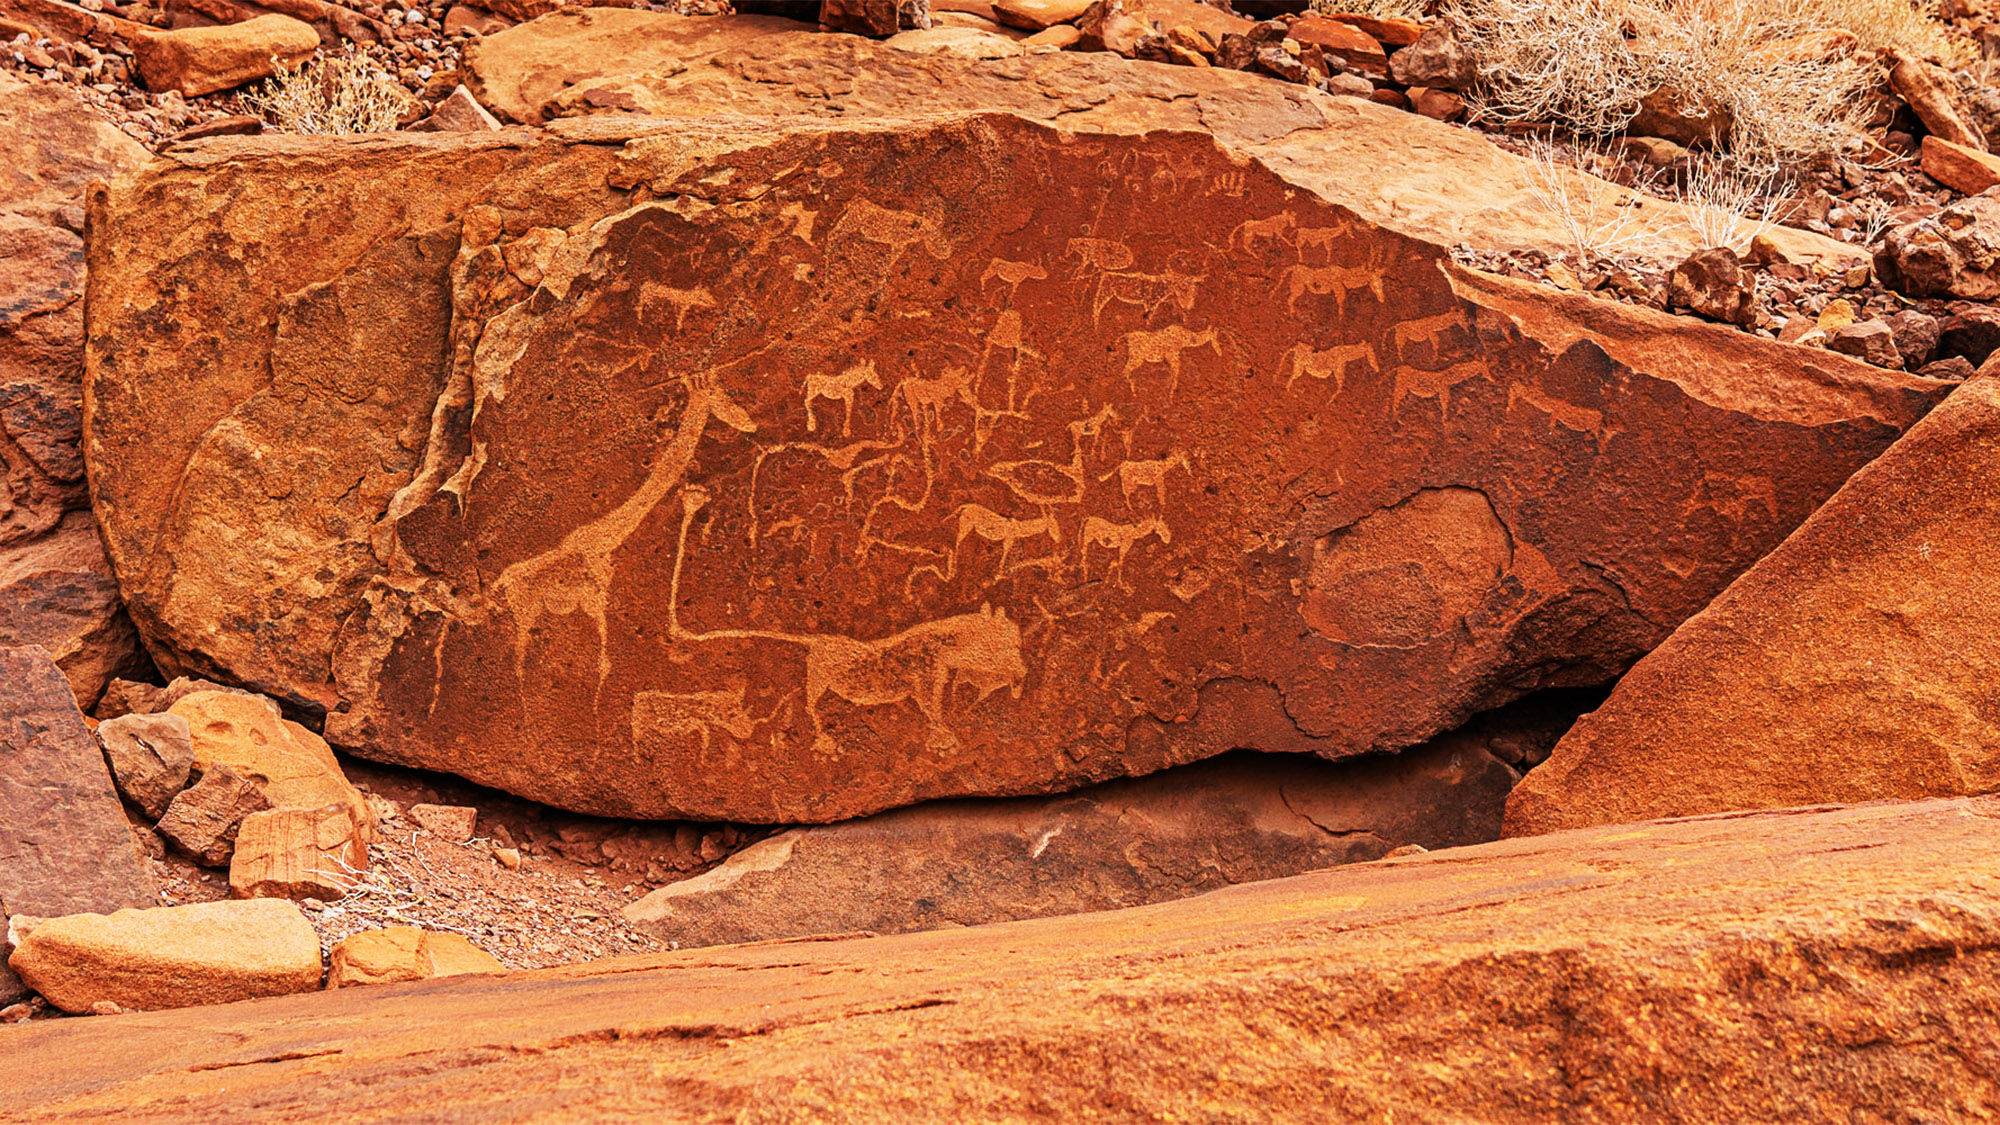 Bushman engravings and rock paintings, some dating back 10,000 years, can be found at Twyfelfontein, in Namibia's Damaraland region.